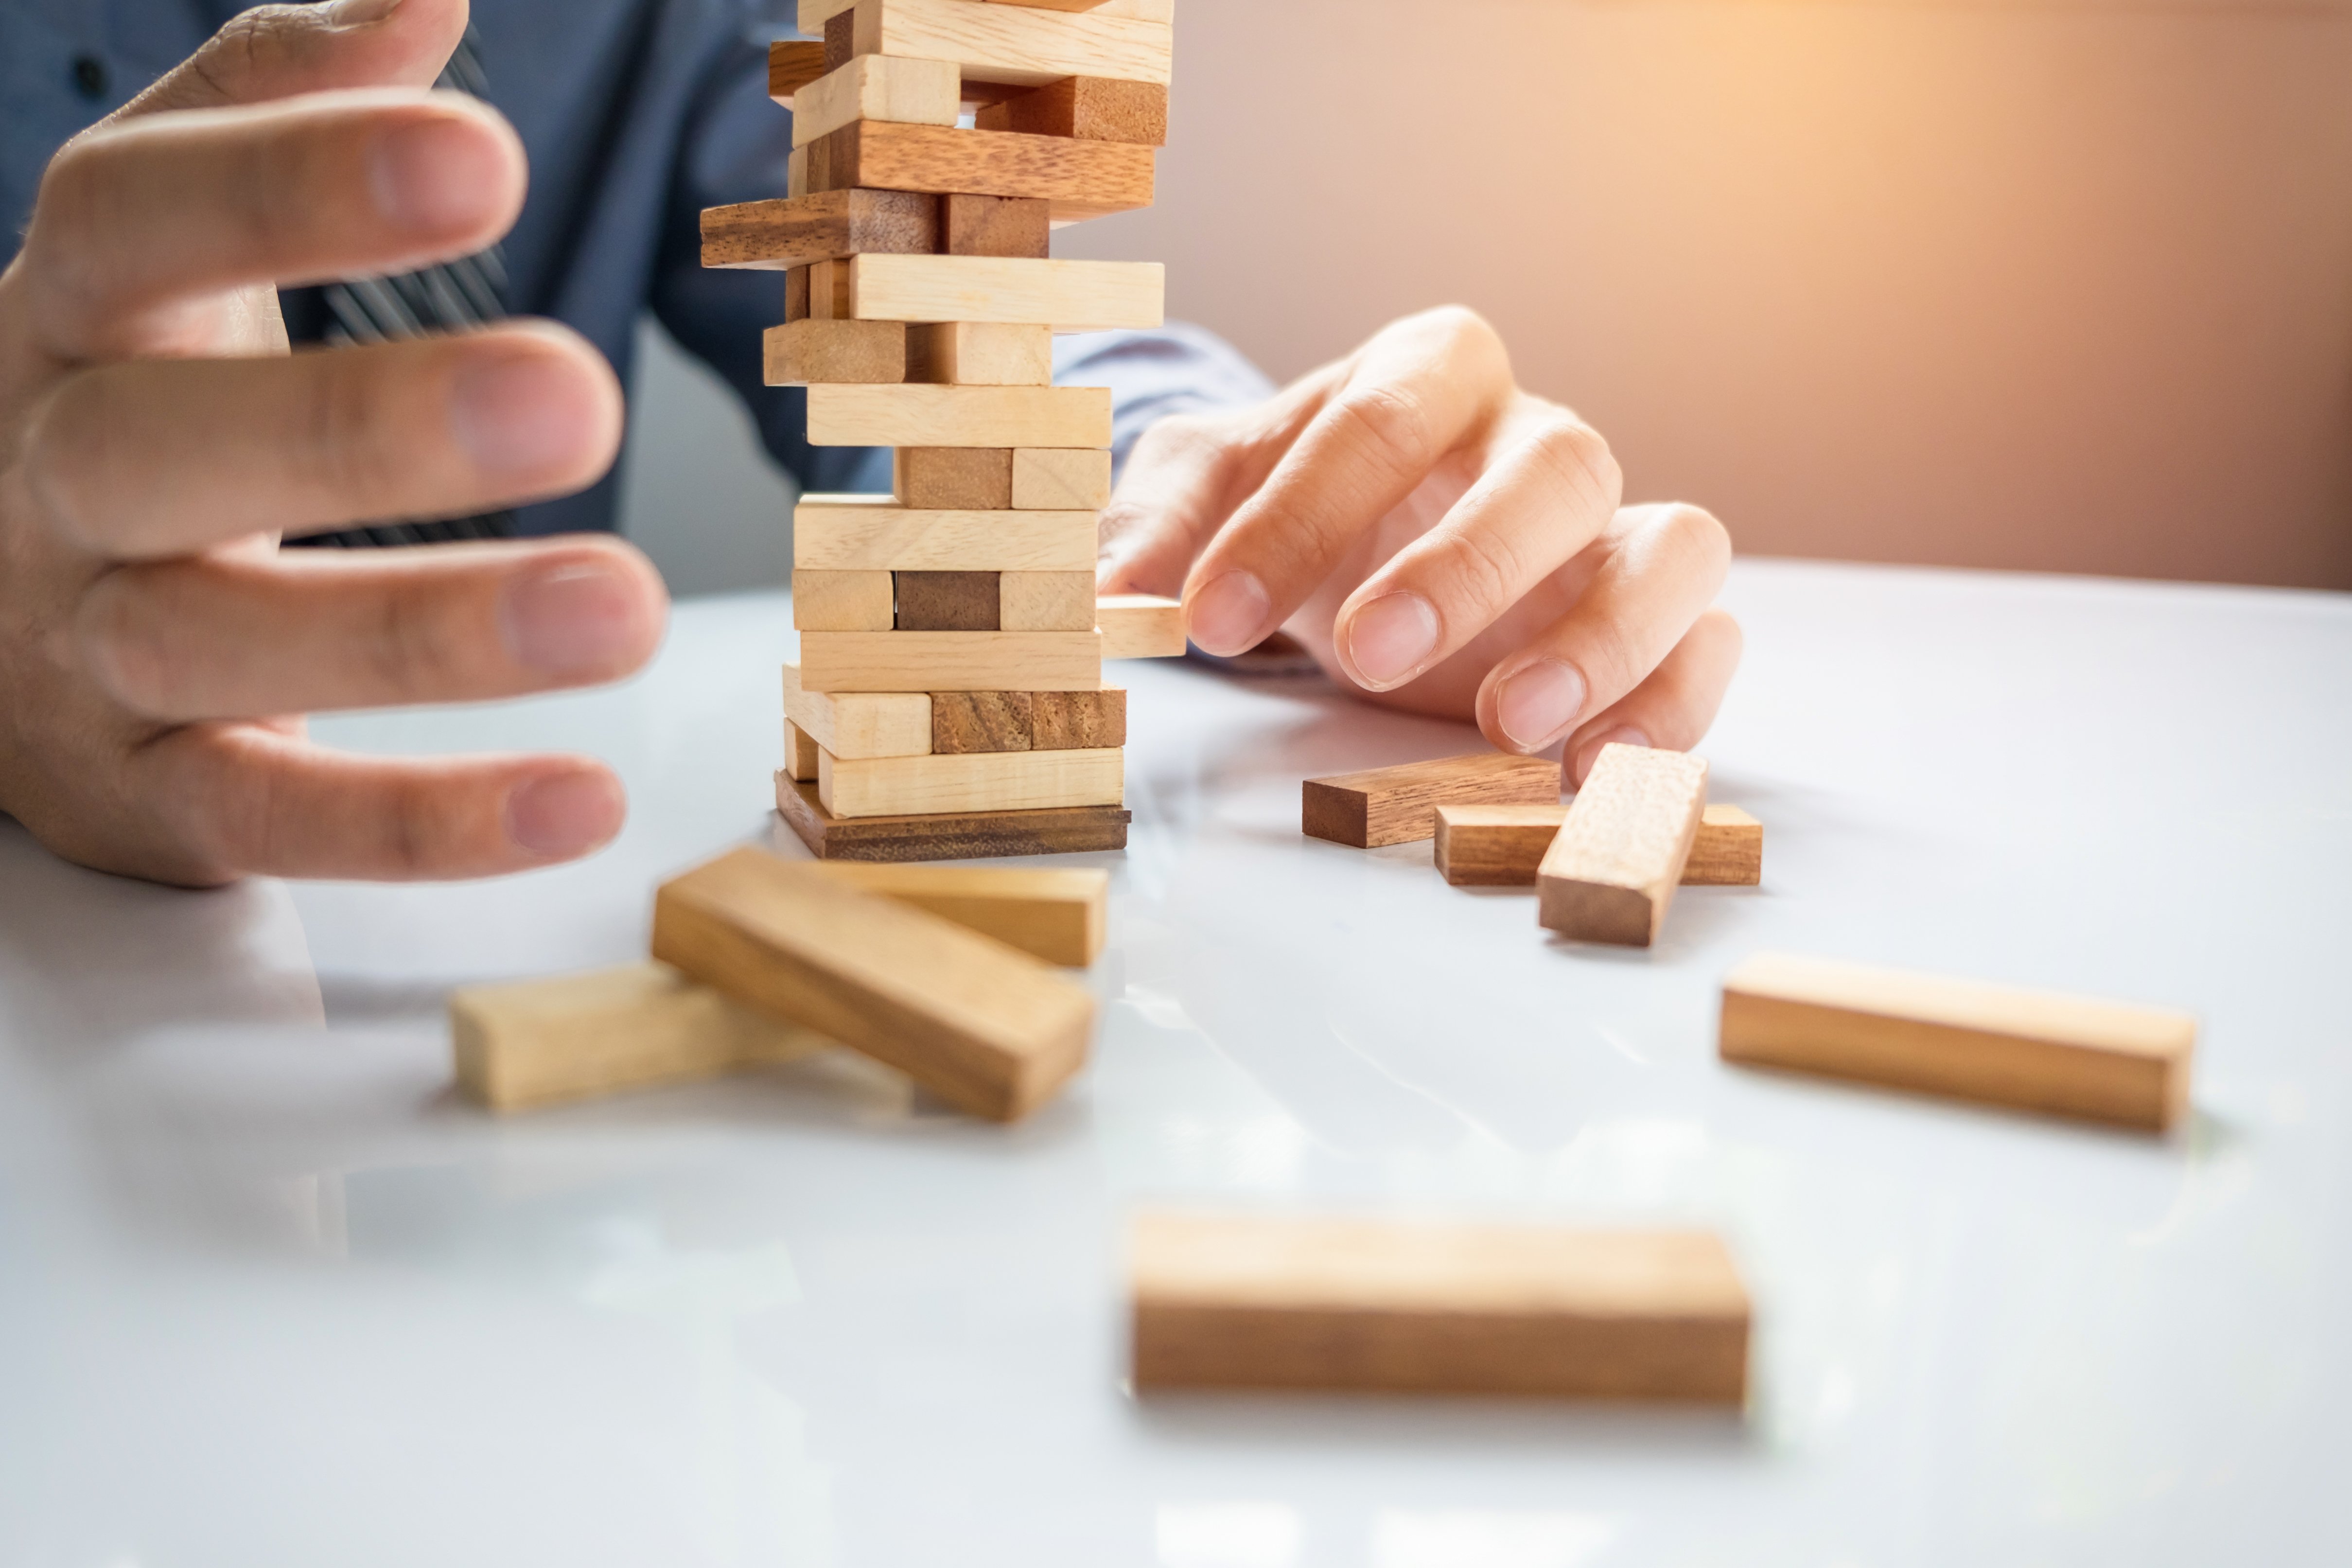 planning-risk-strategy-business-businessman-gambling-placing-wooden-block-tower